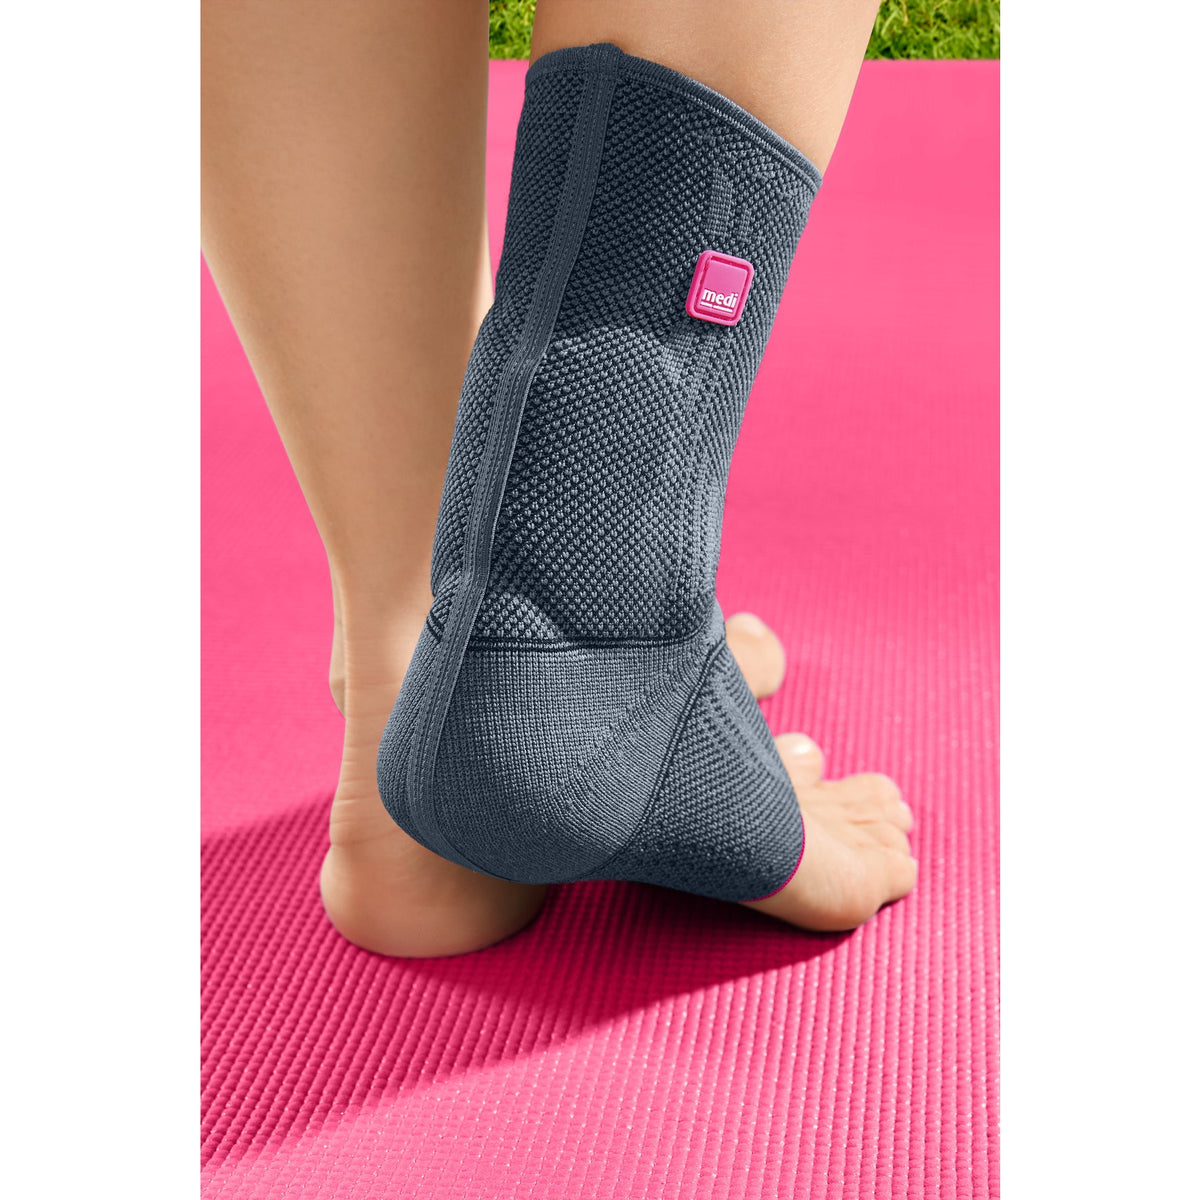 Levamed active comfort ankle support